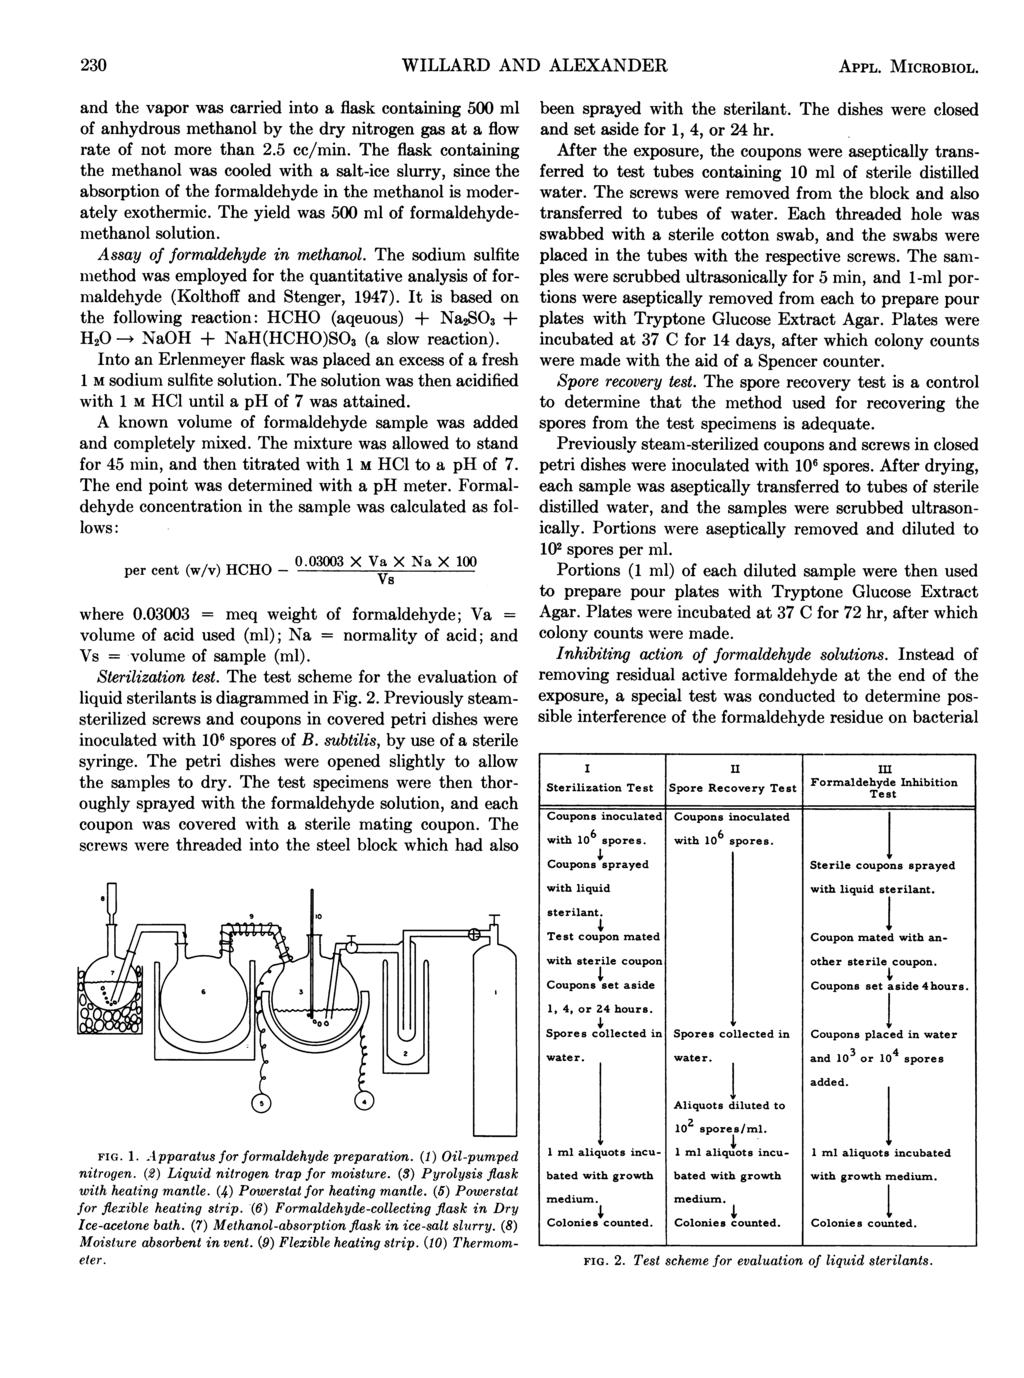 WILLARD AND ALEXANDER APPL. MICROBIOL. and the vapor was carried into a flask containing 5 ml of anhydrous methanol by the dry nitrogen gas at a flow rate of not more than.5 cc/min.